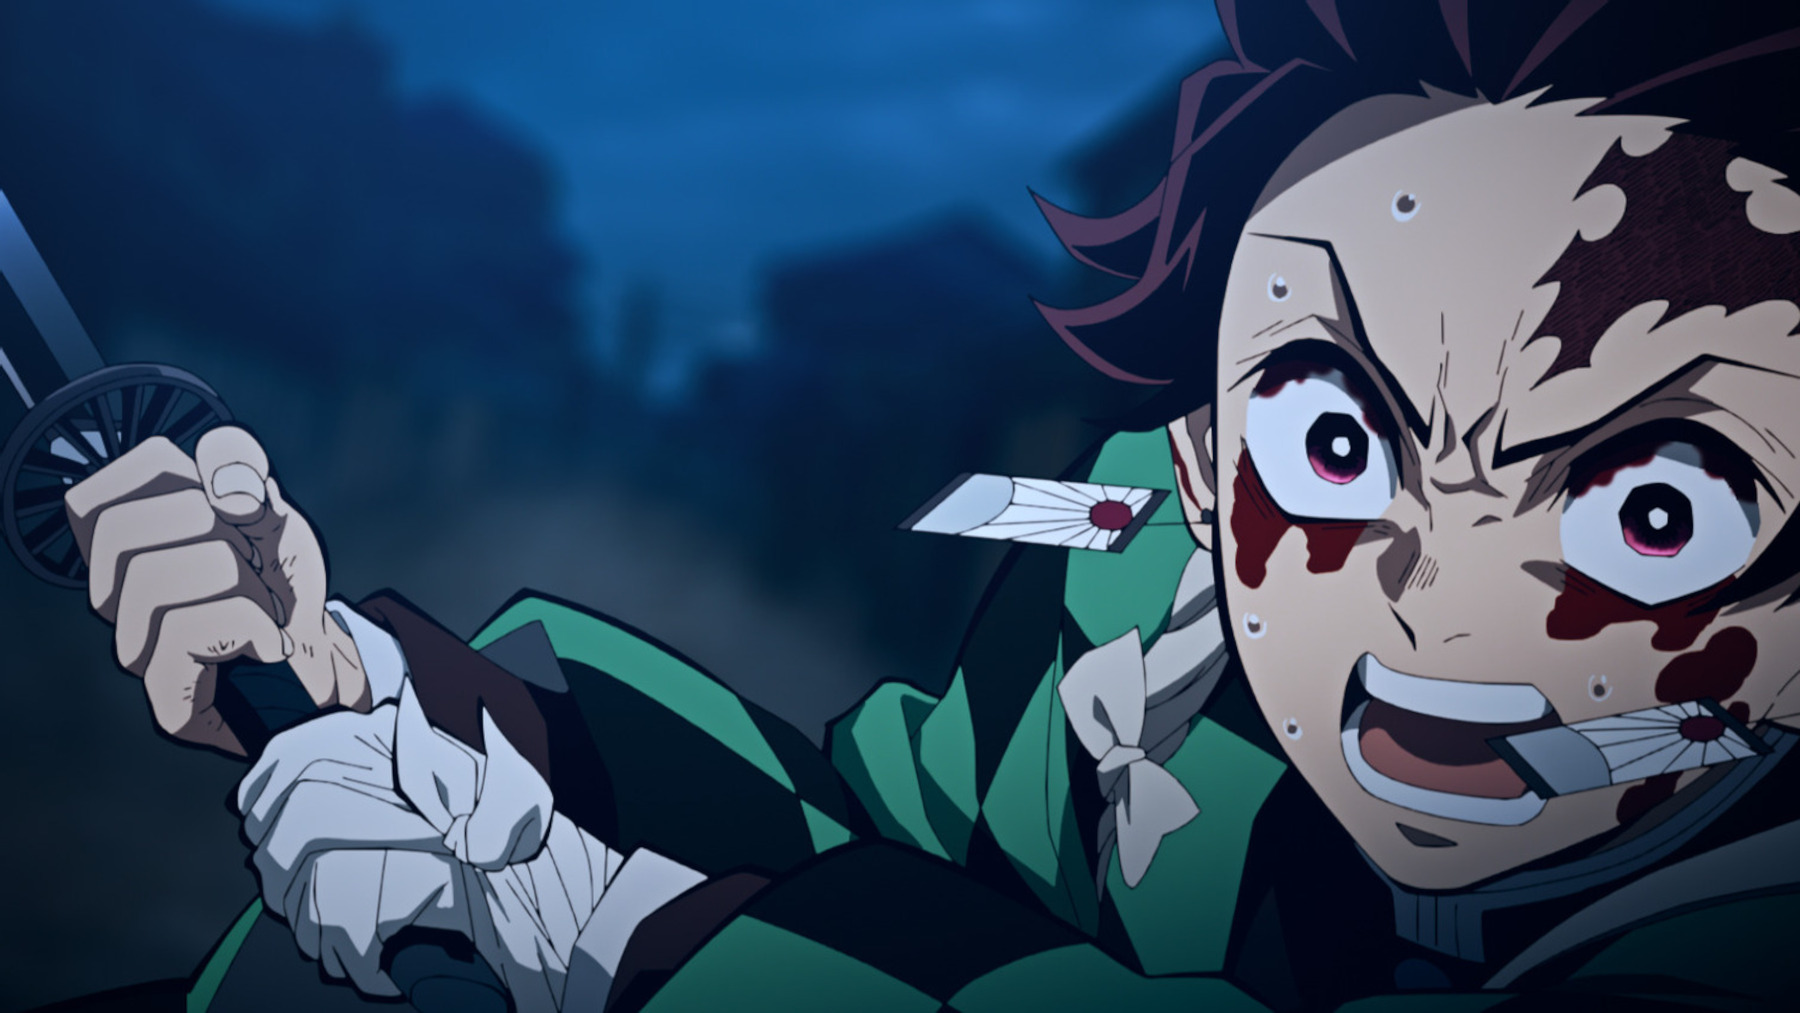 Demon Slayer Season 3: Plot, Cast, Release Date, and Everything